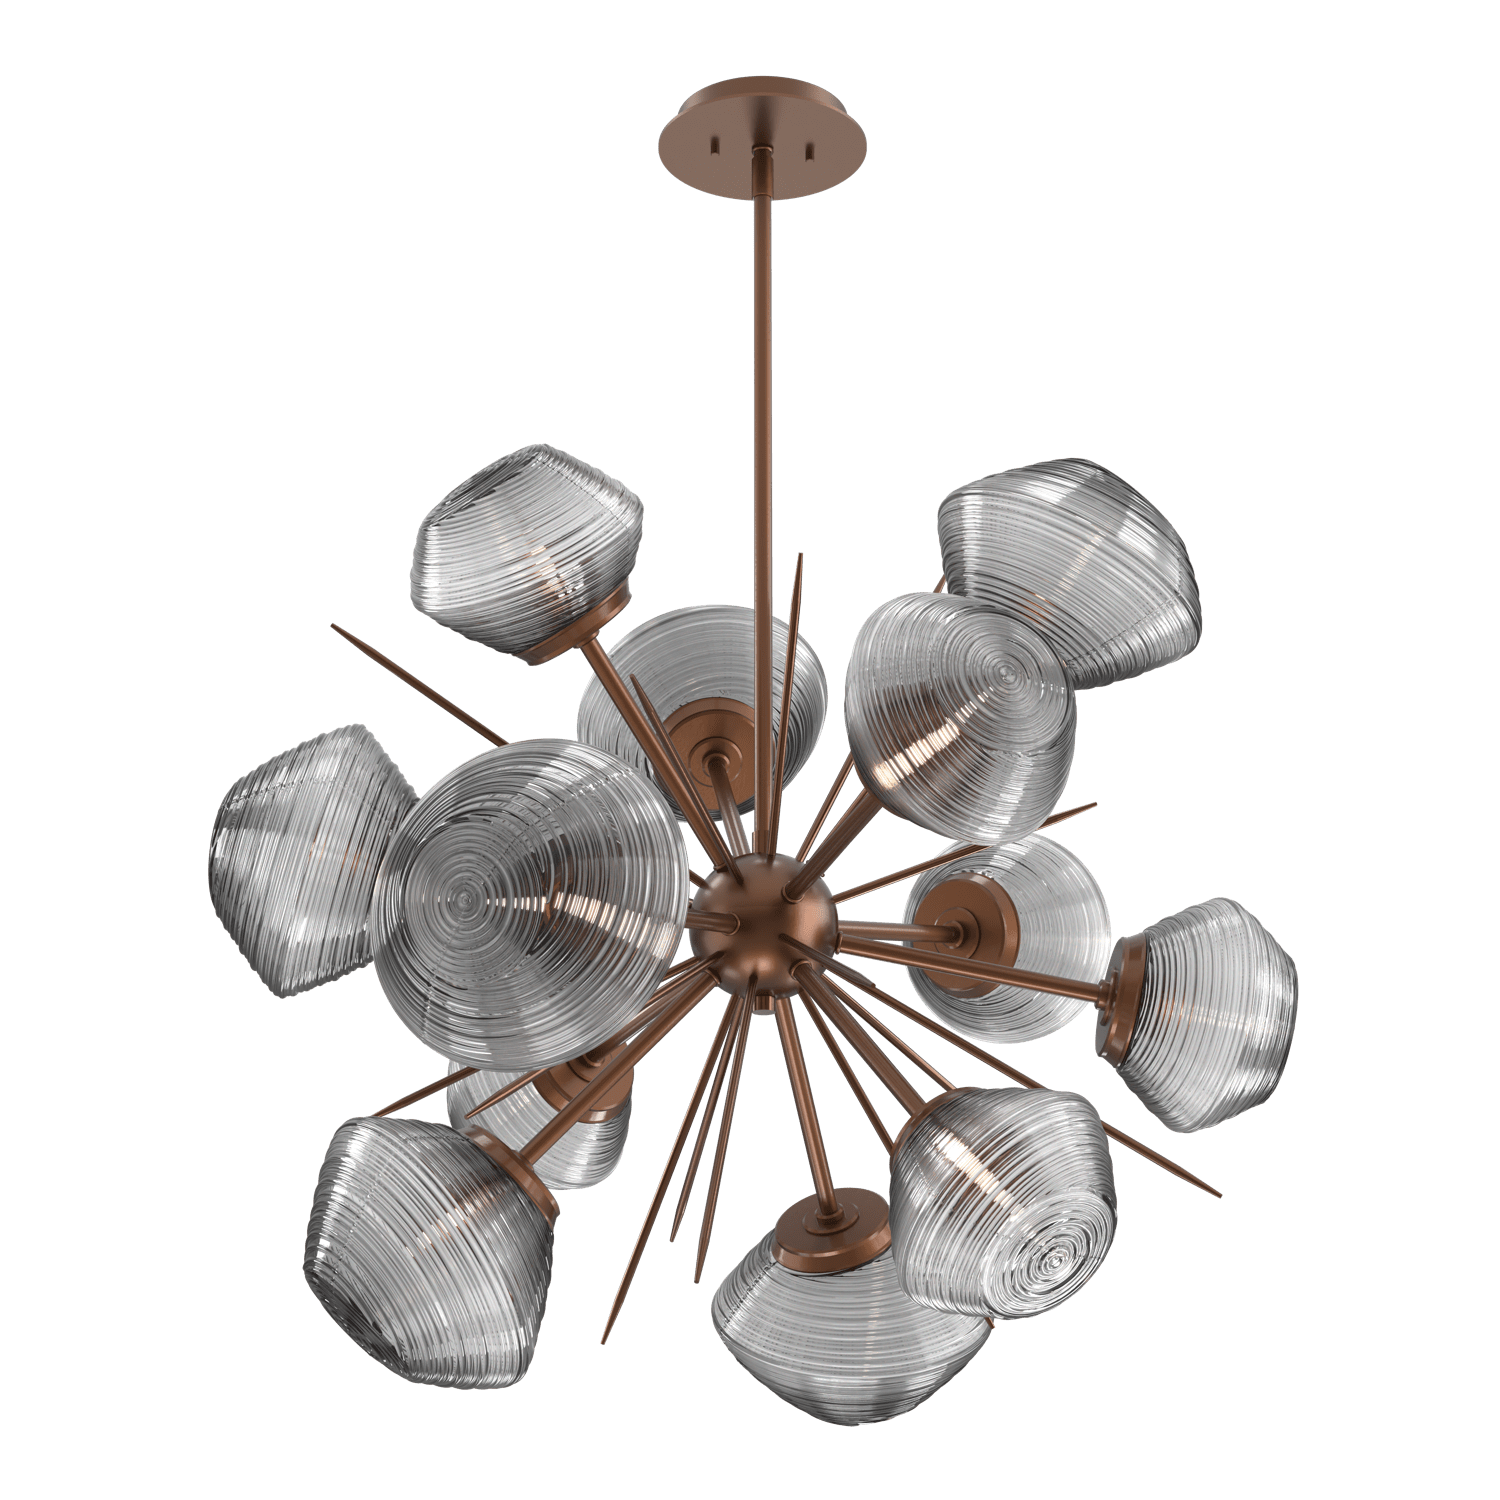 CHB0089-0G-BB-S-Hammerton-Studio-Mesa-36-inch-starburst-chandelier-with-burnished-bronze-finish-and-smoke-blown-glass-shades-and-LED-lamping